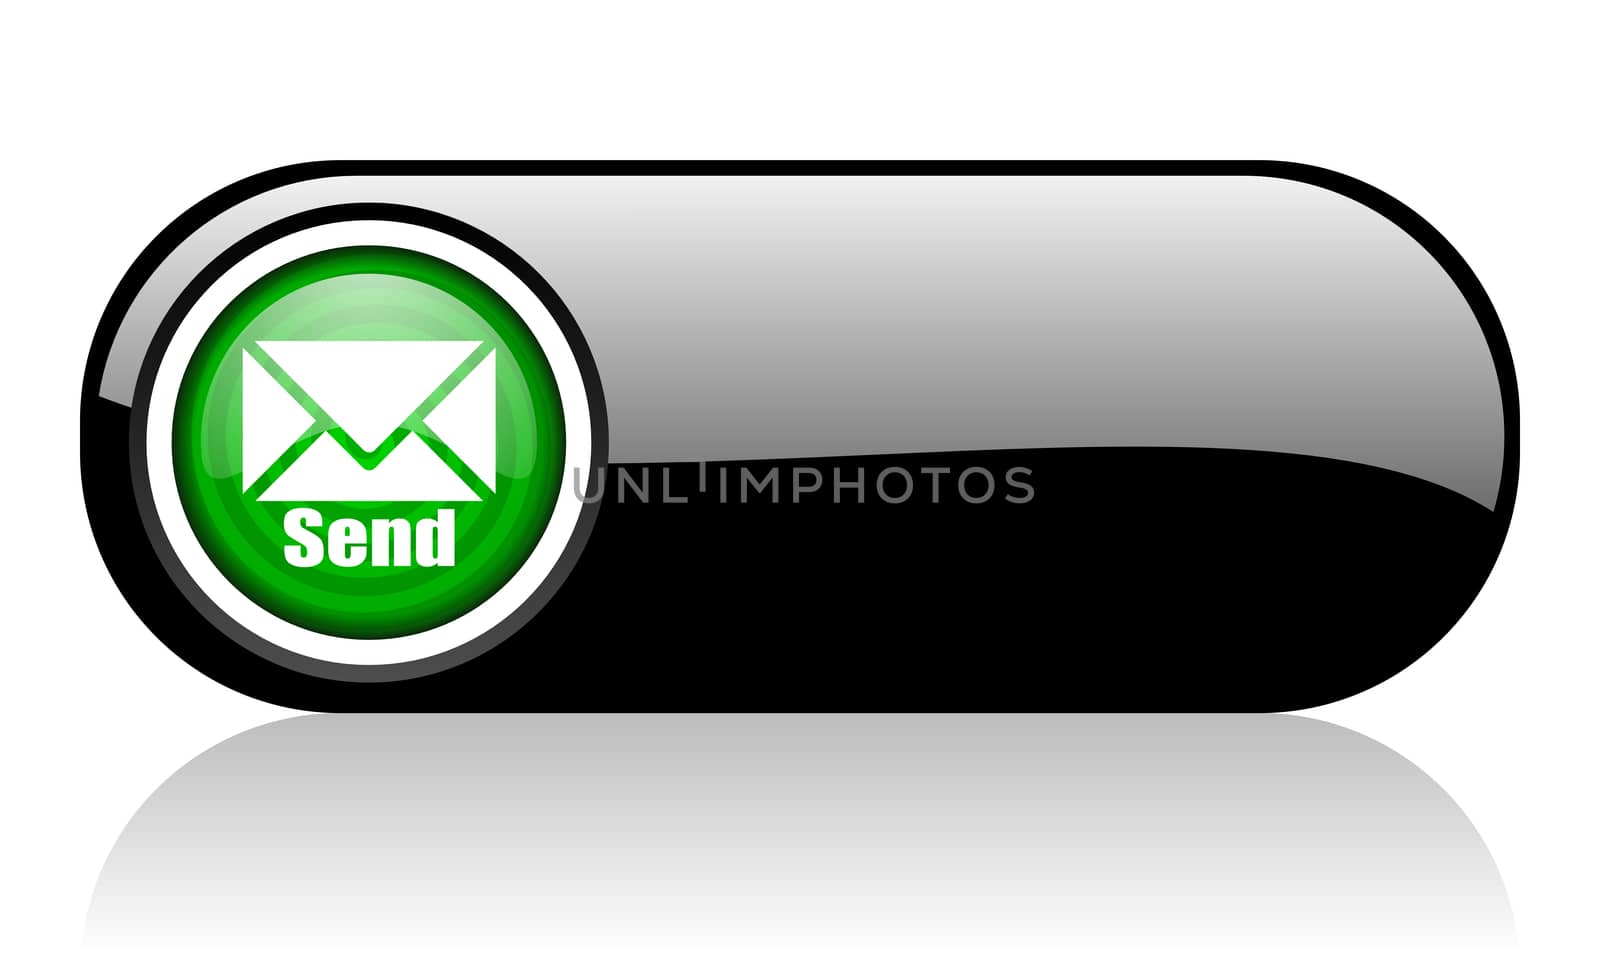 send black and green web icon on white background